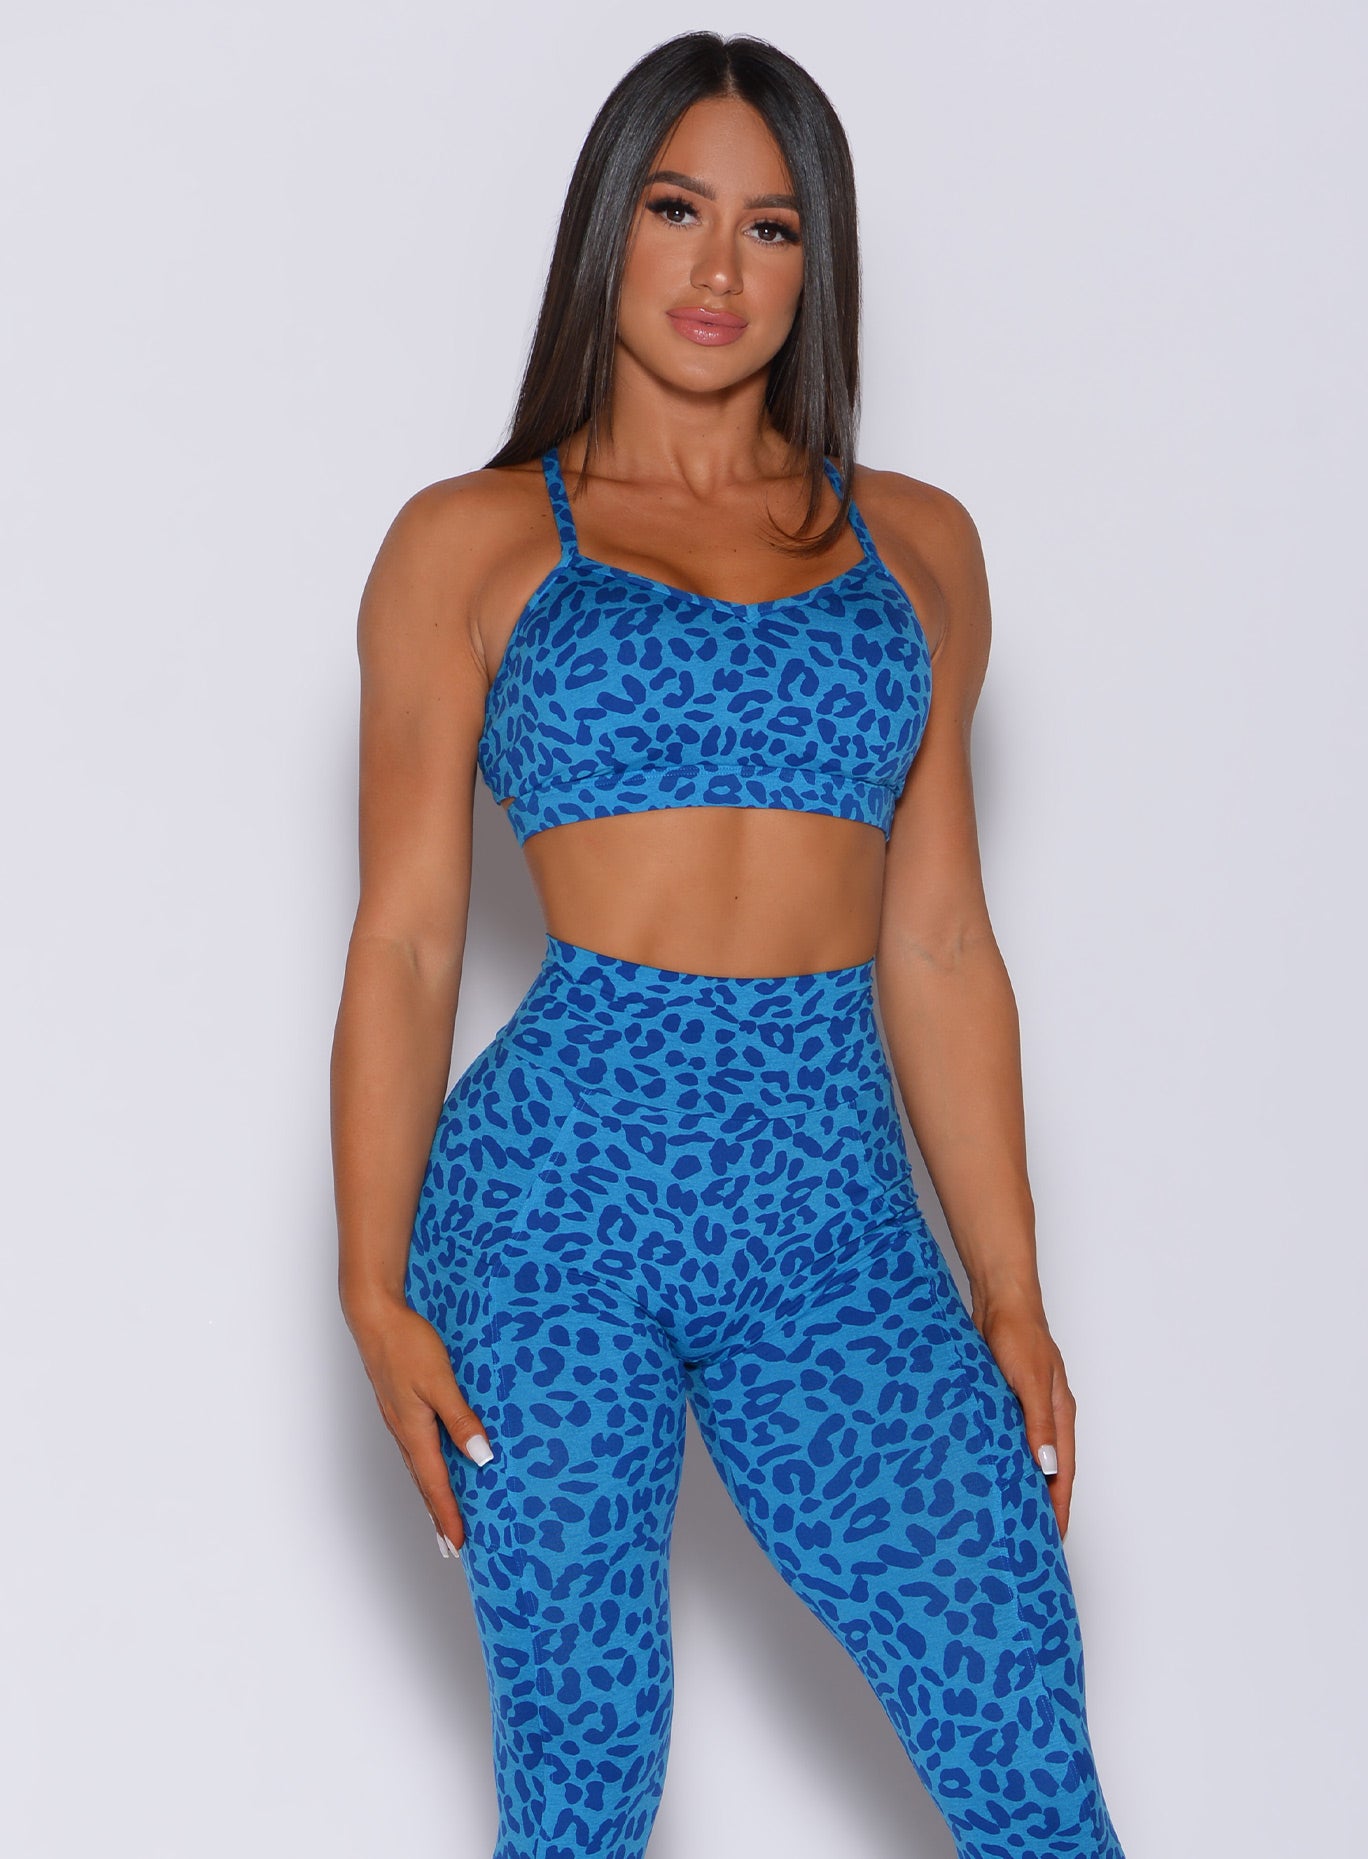 Model facing forward wearing our pumped sports bra in blue cheetah color and matching leggings